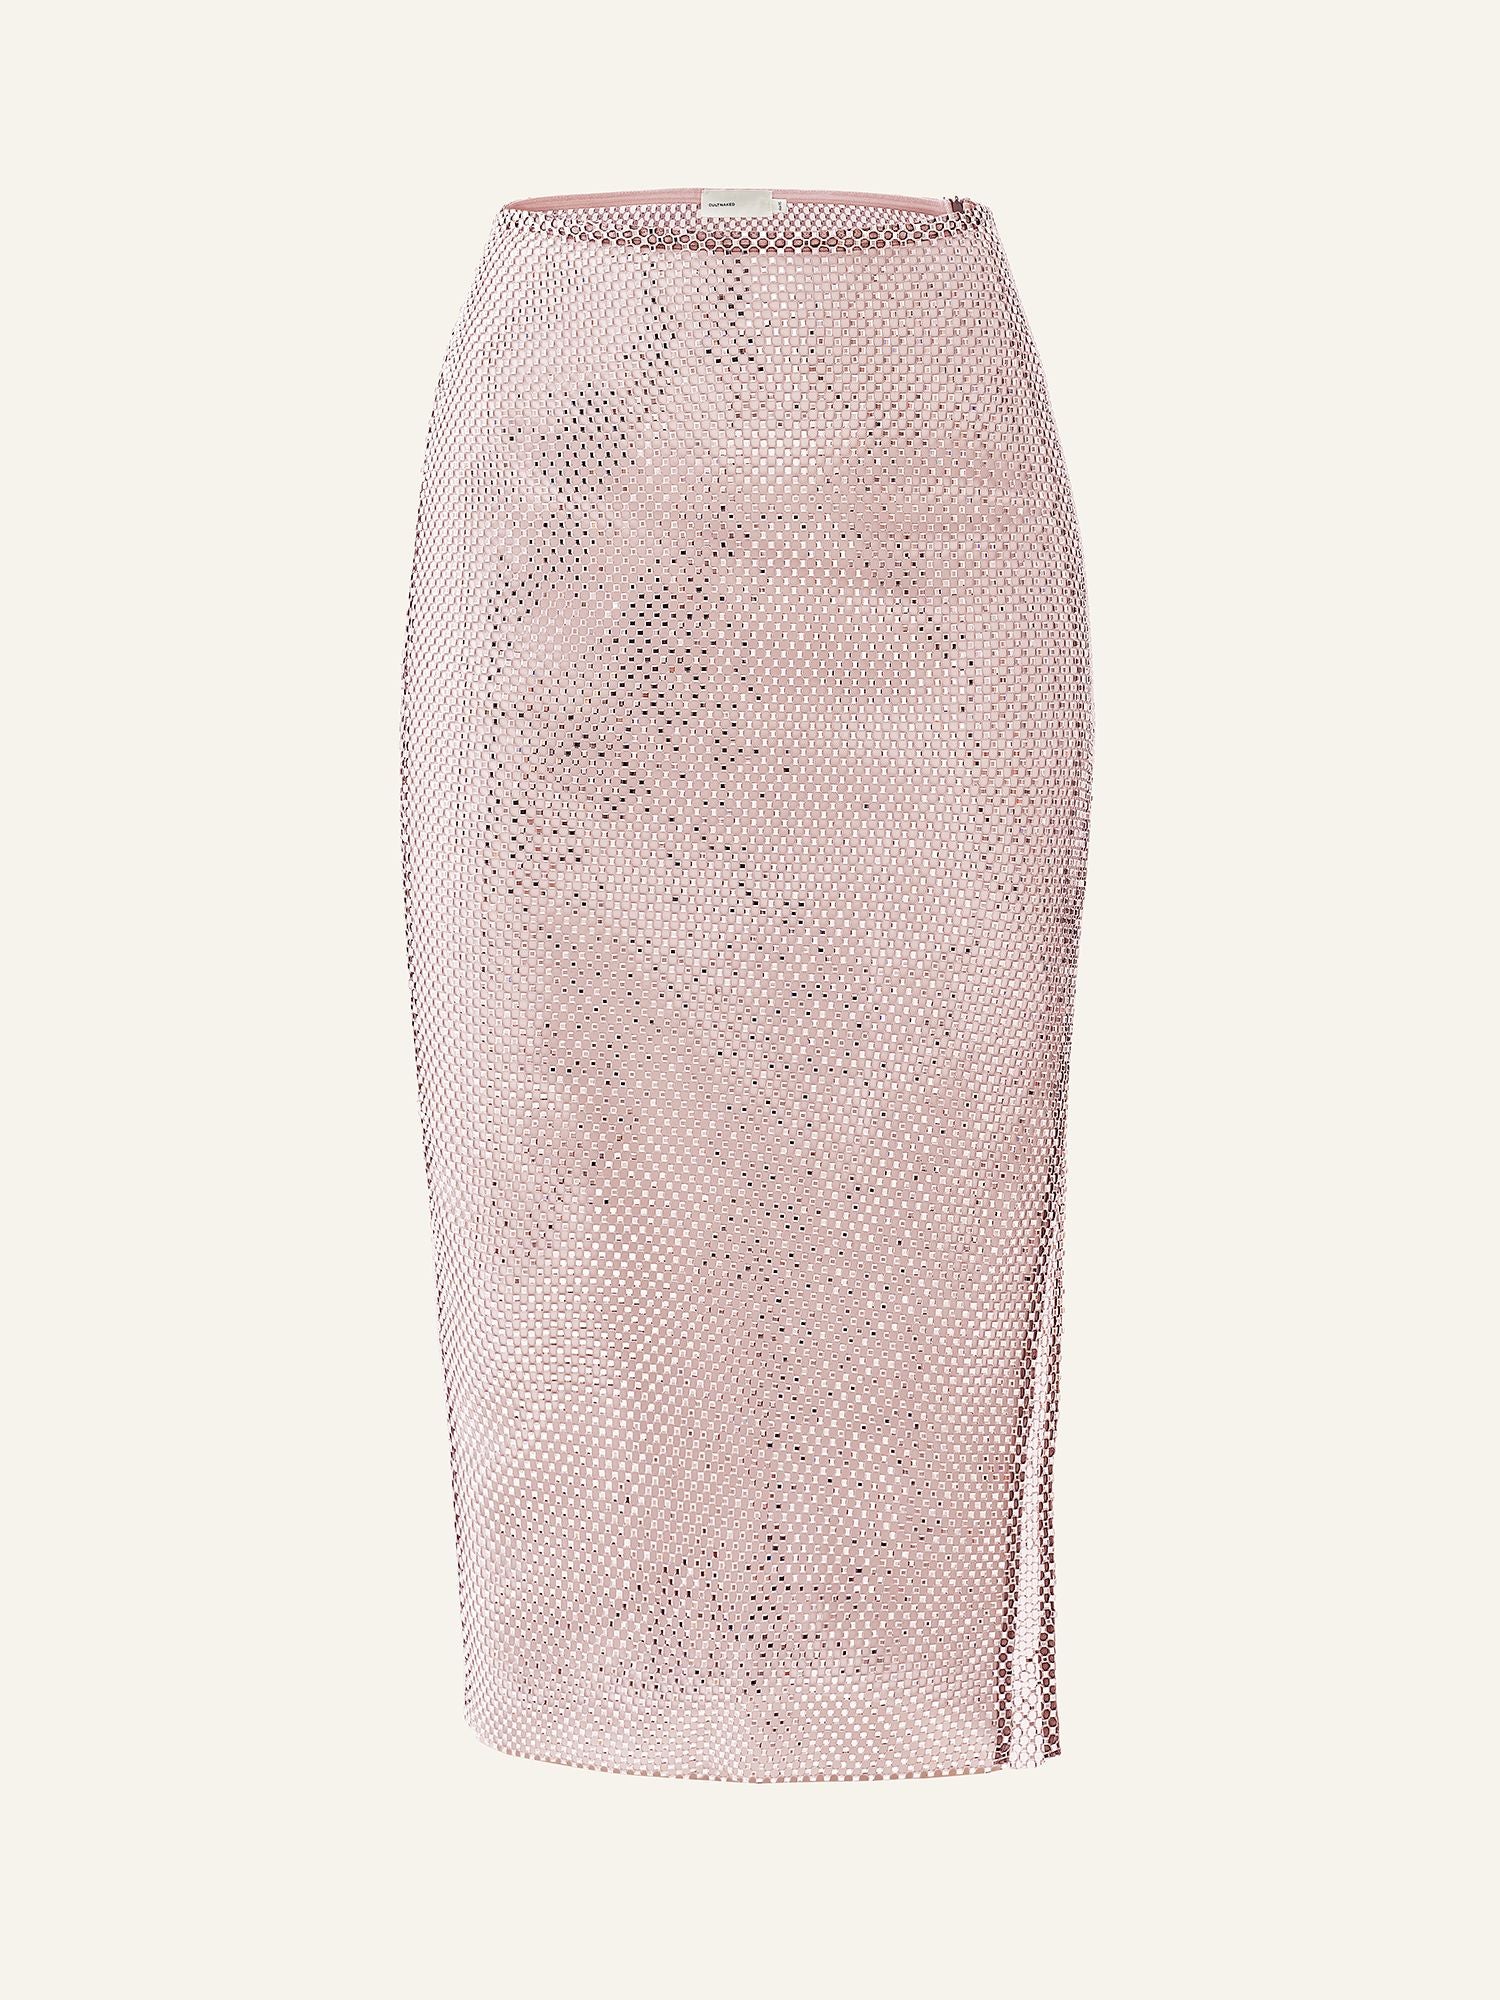 Stardust Pencil skirt in Champagne